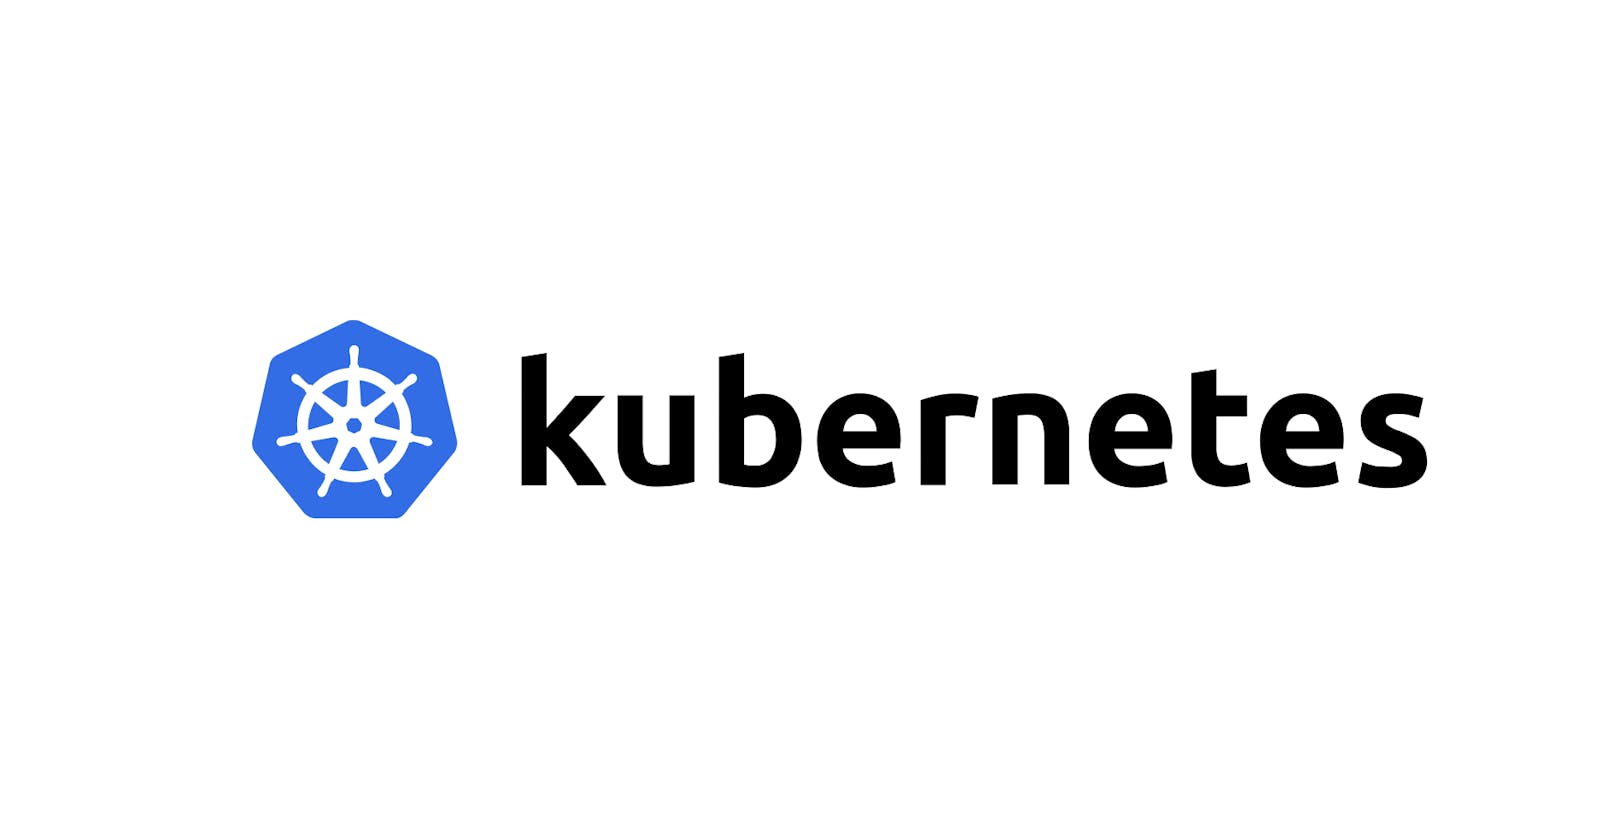 Components of Kubernetes Architecture